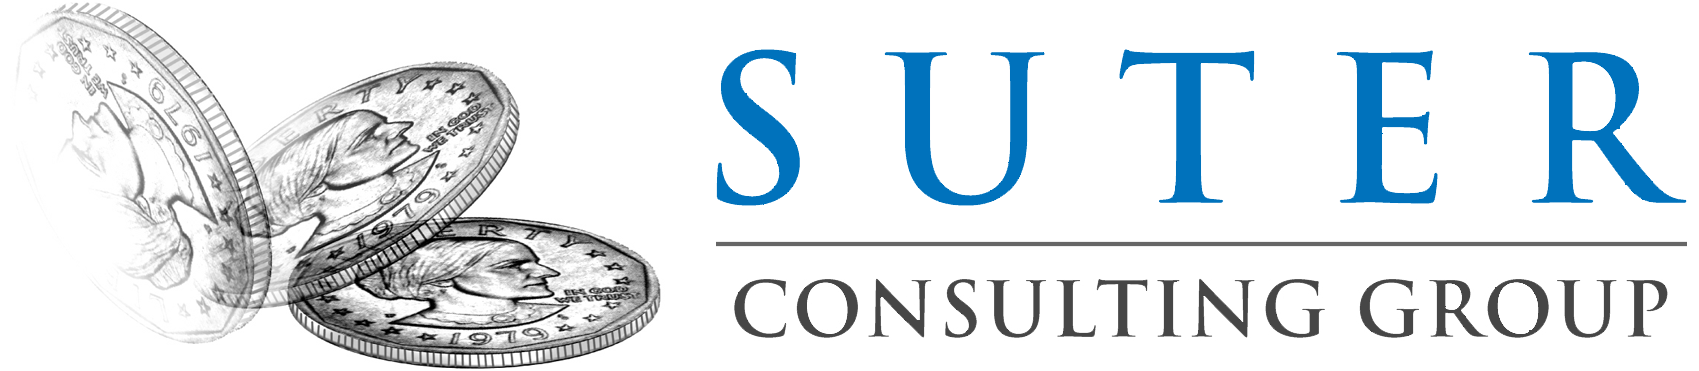 Suter Consulting Group